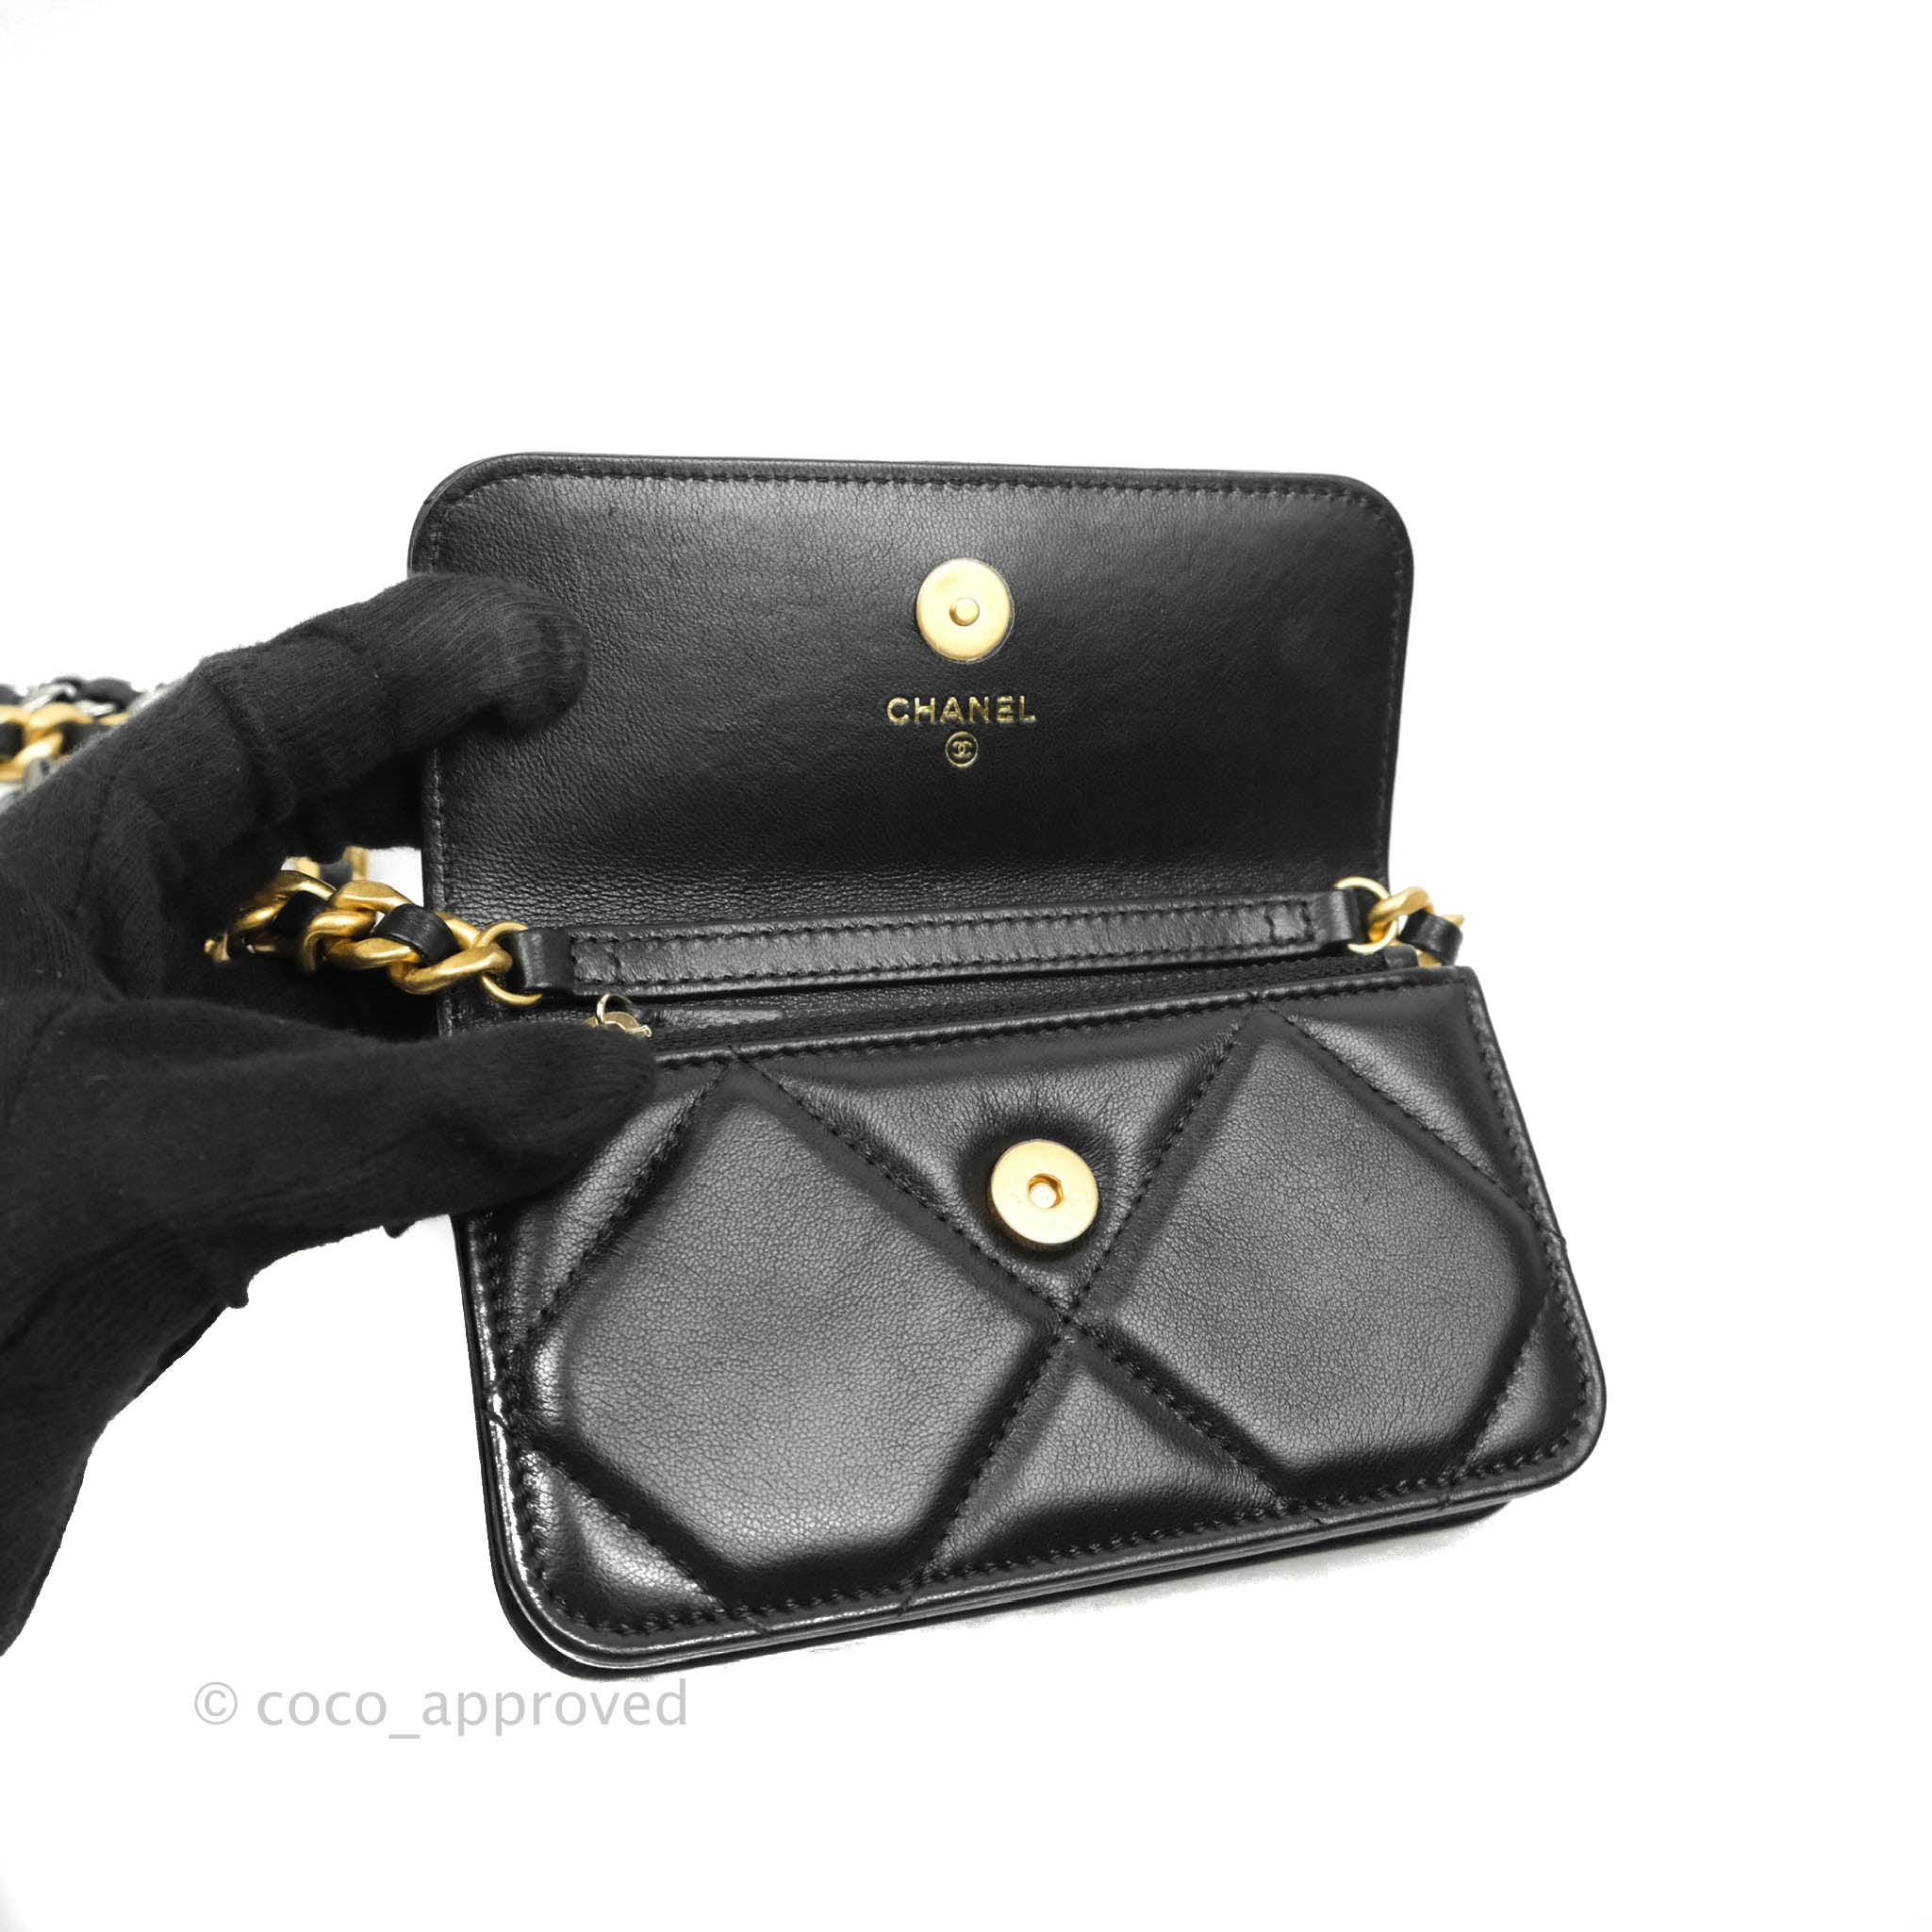 CHANEL Fashion  SpringSummer 2020  Clutch with Chain  Reference AP1193  B02792 94305  2950 Recommended retail price Act  Chanel bag Bags Chanel  clutch